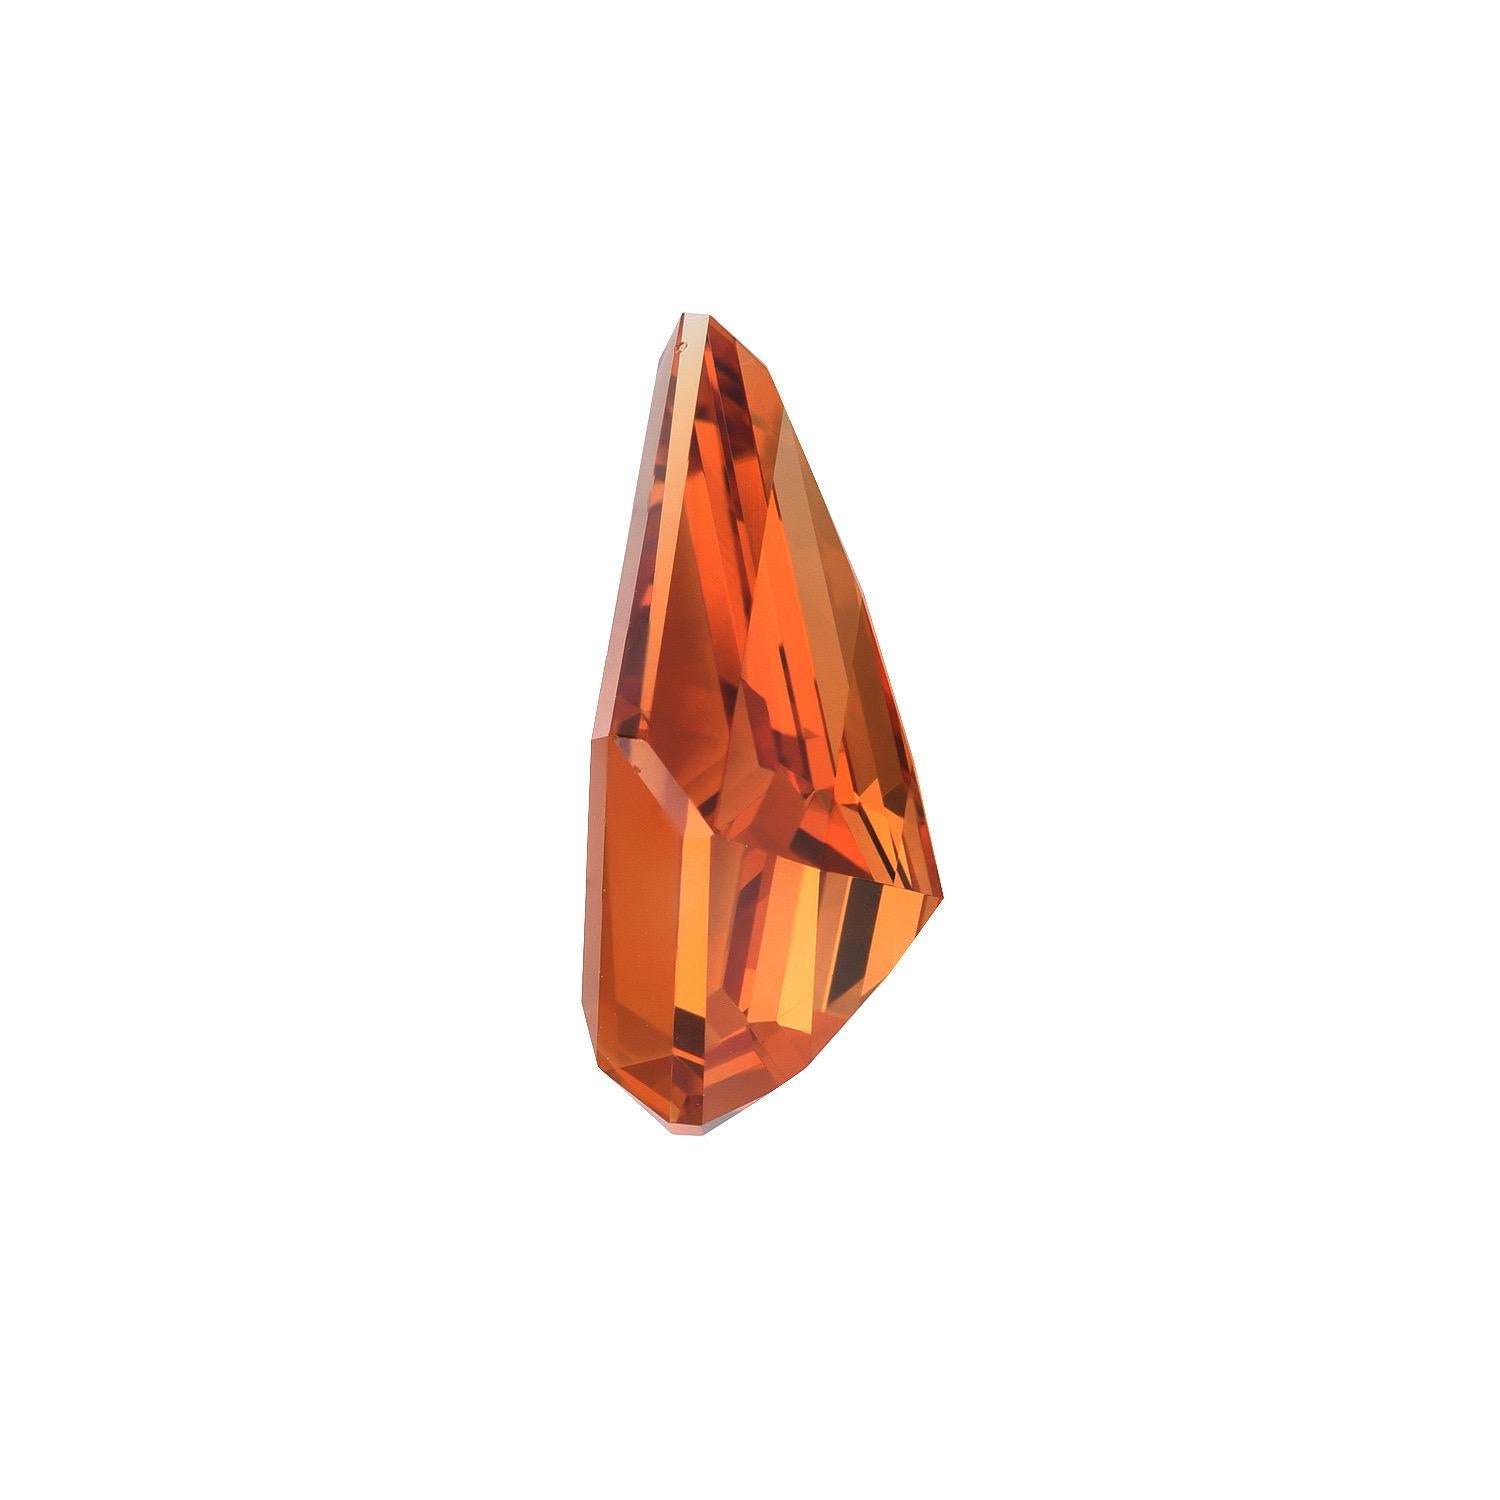 3.69 carat Mandarin Garnet Kite shaped loose gemstone, offered unmounted to a unique gem collector.
Returns are accepted and paid by us within 7 days of delivery.
We offer supreme custom jewelry work upon request. Please contact us for more